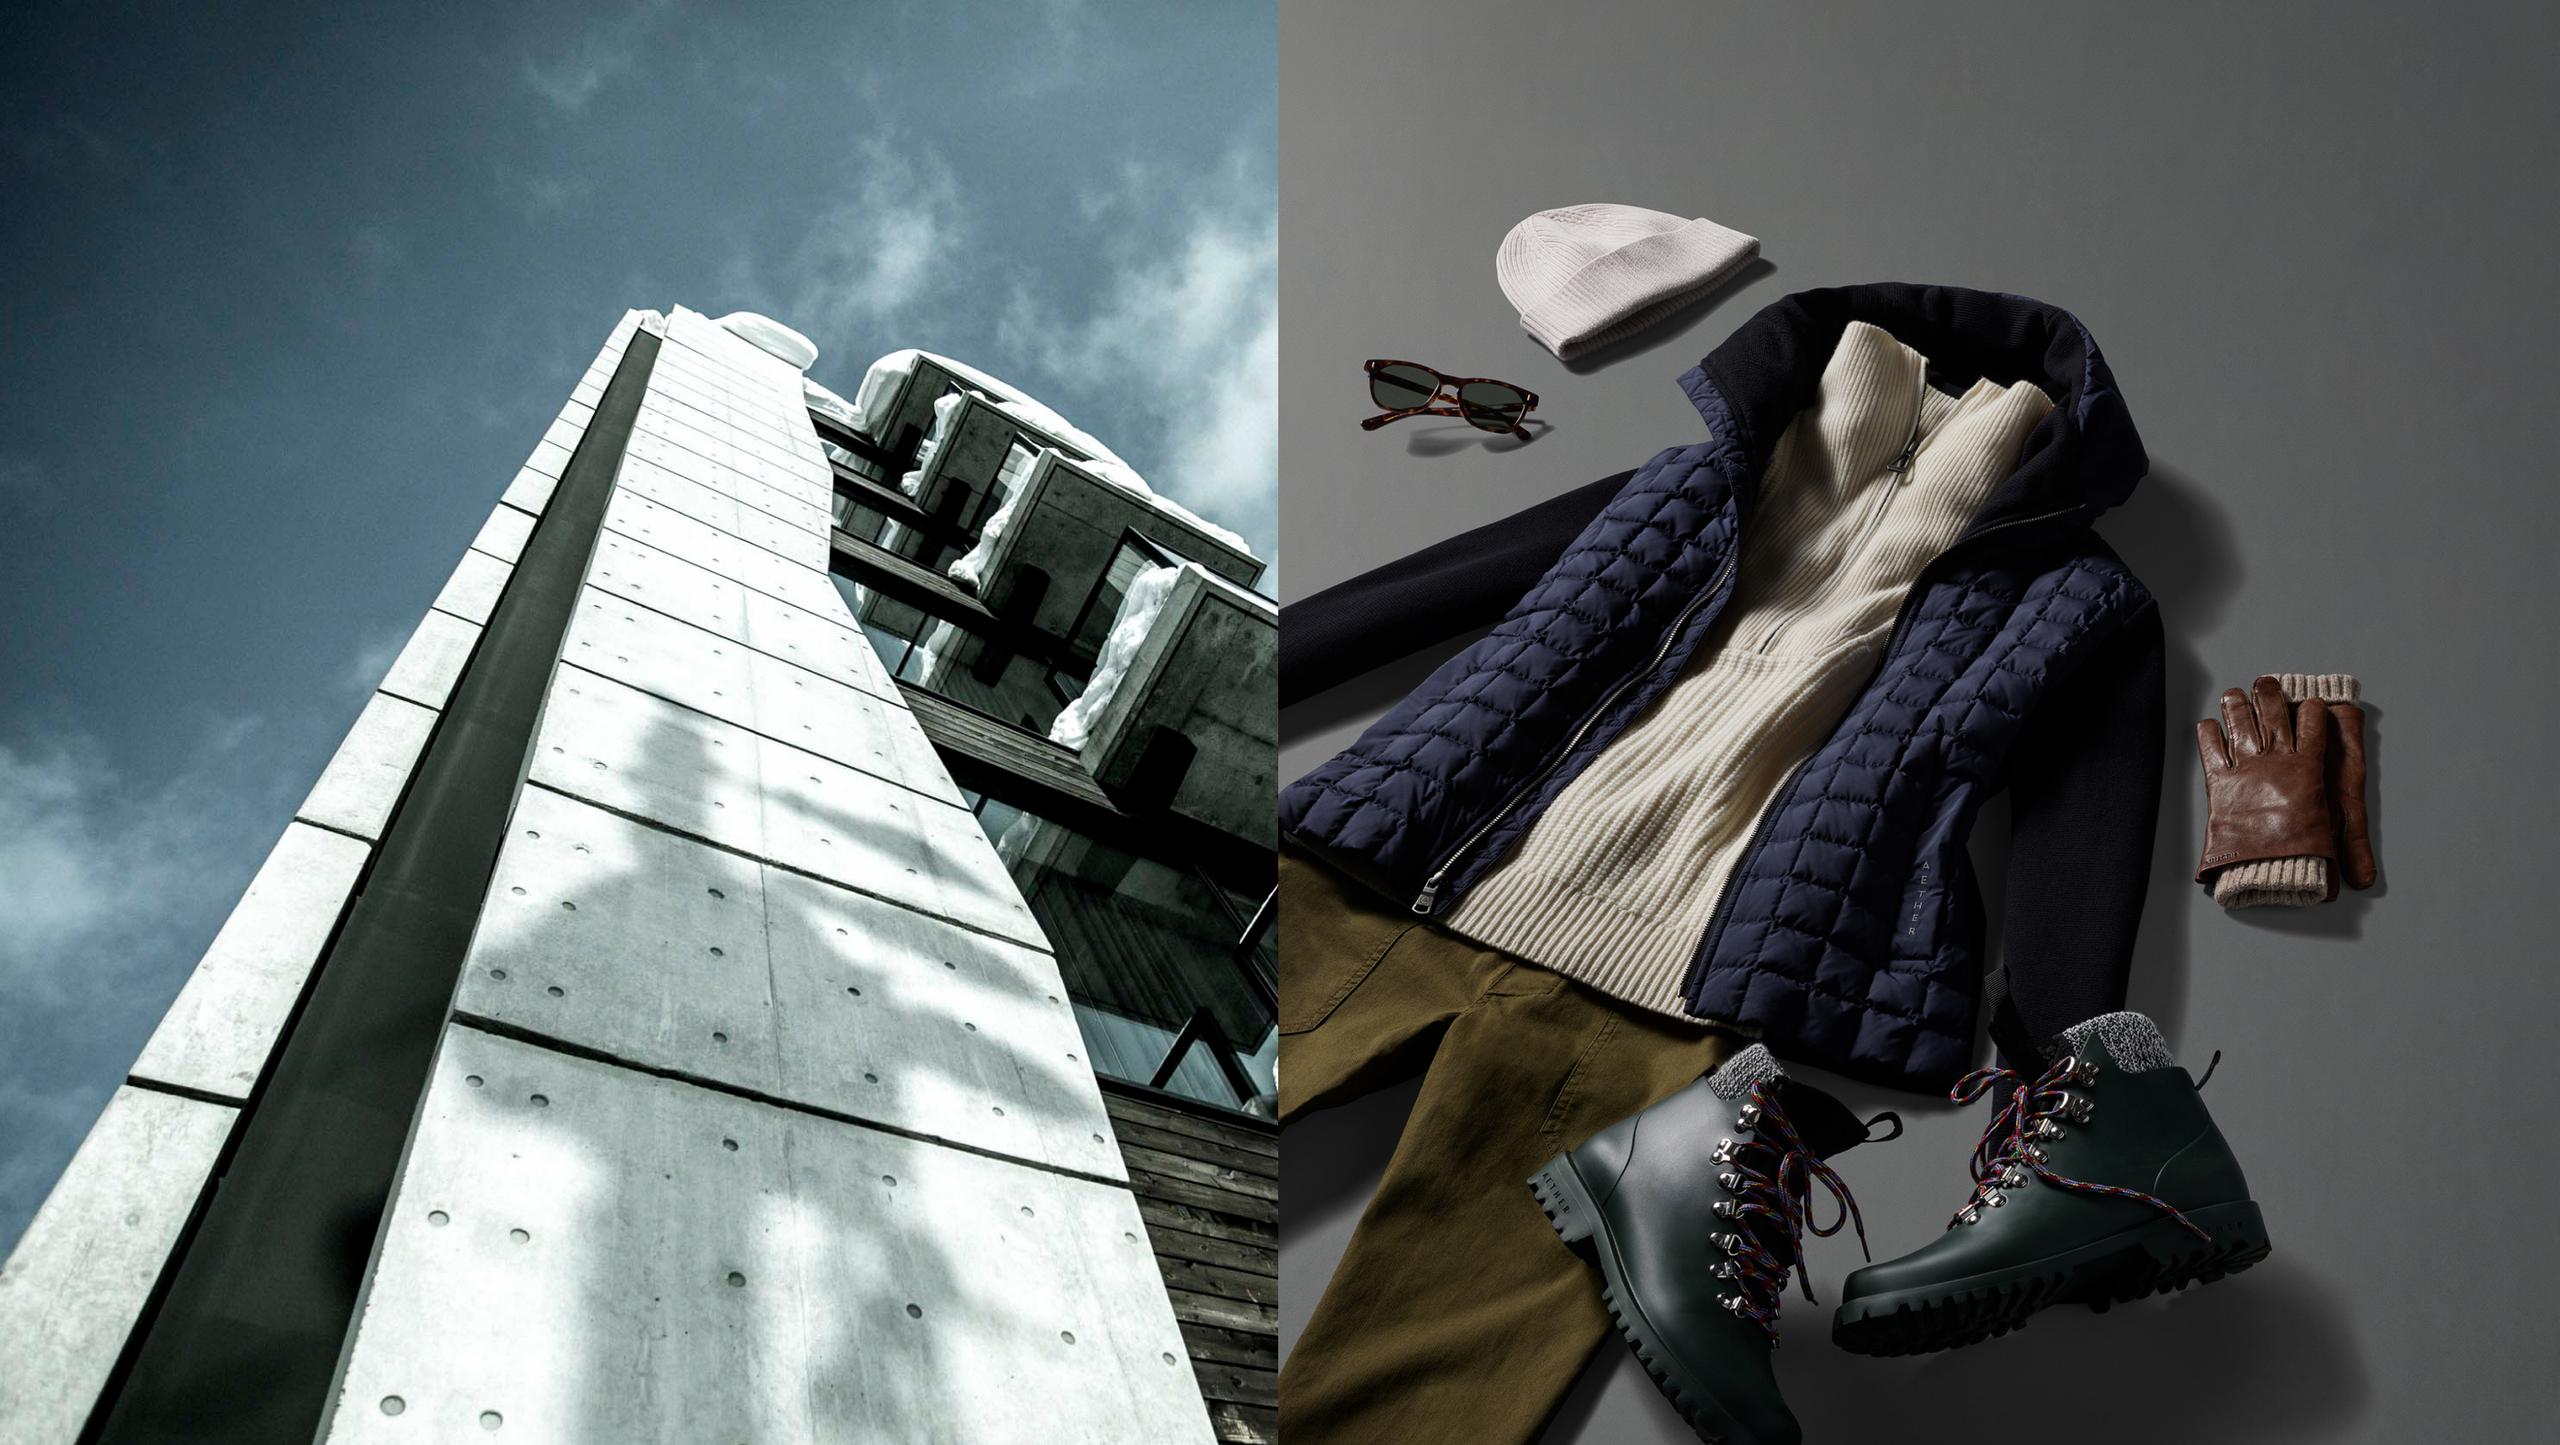 Photo on left - Looking up on a snowy building in Hokkaido, Japan / Photo on right is studio laydown of AETHER outfit